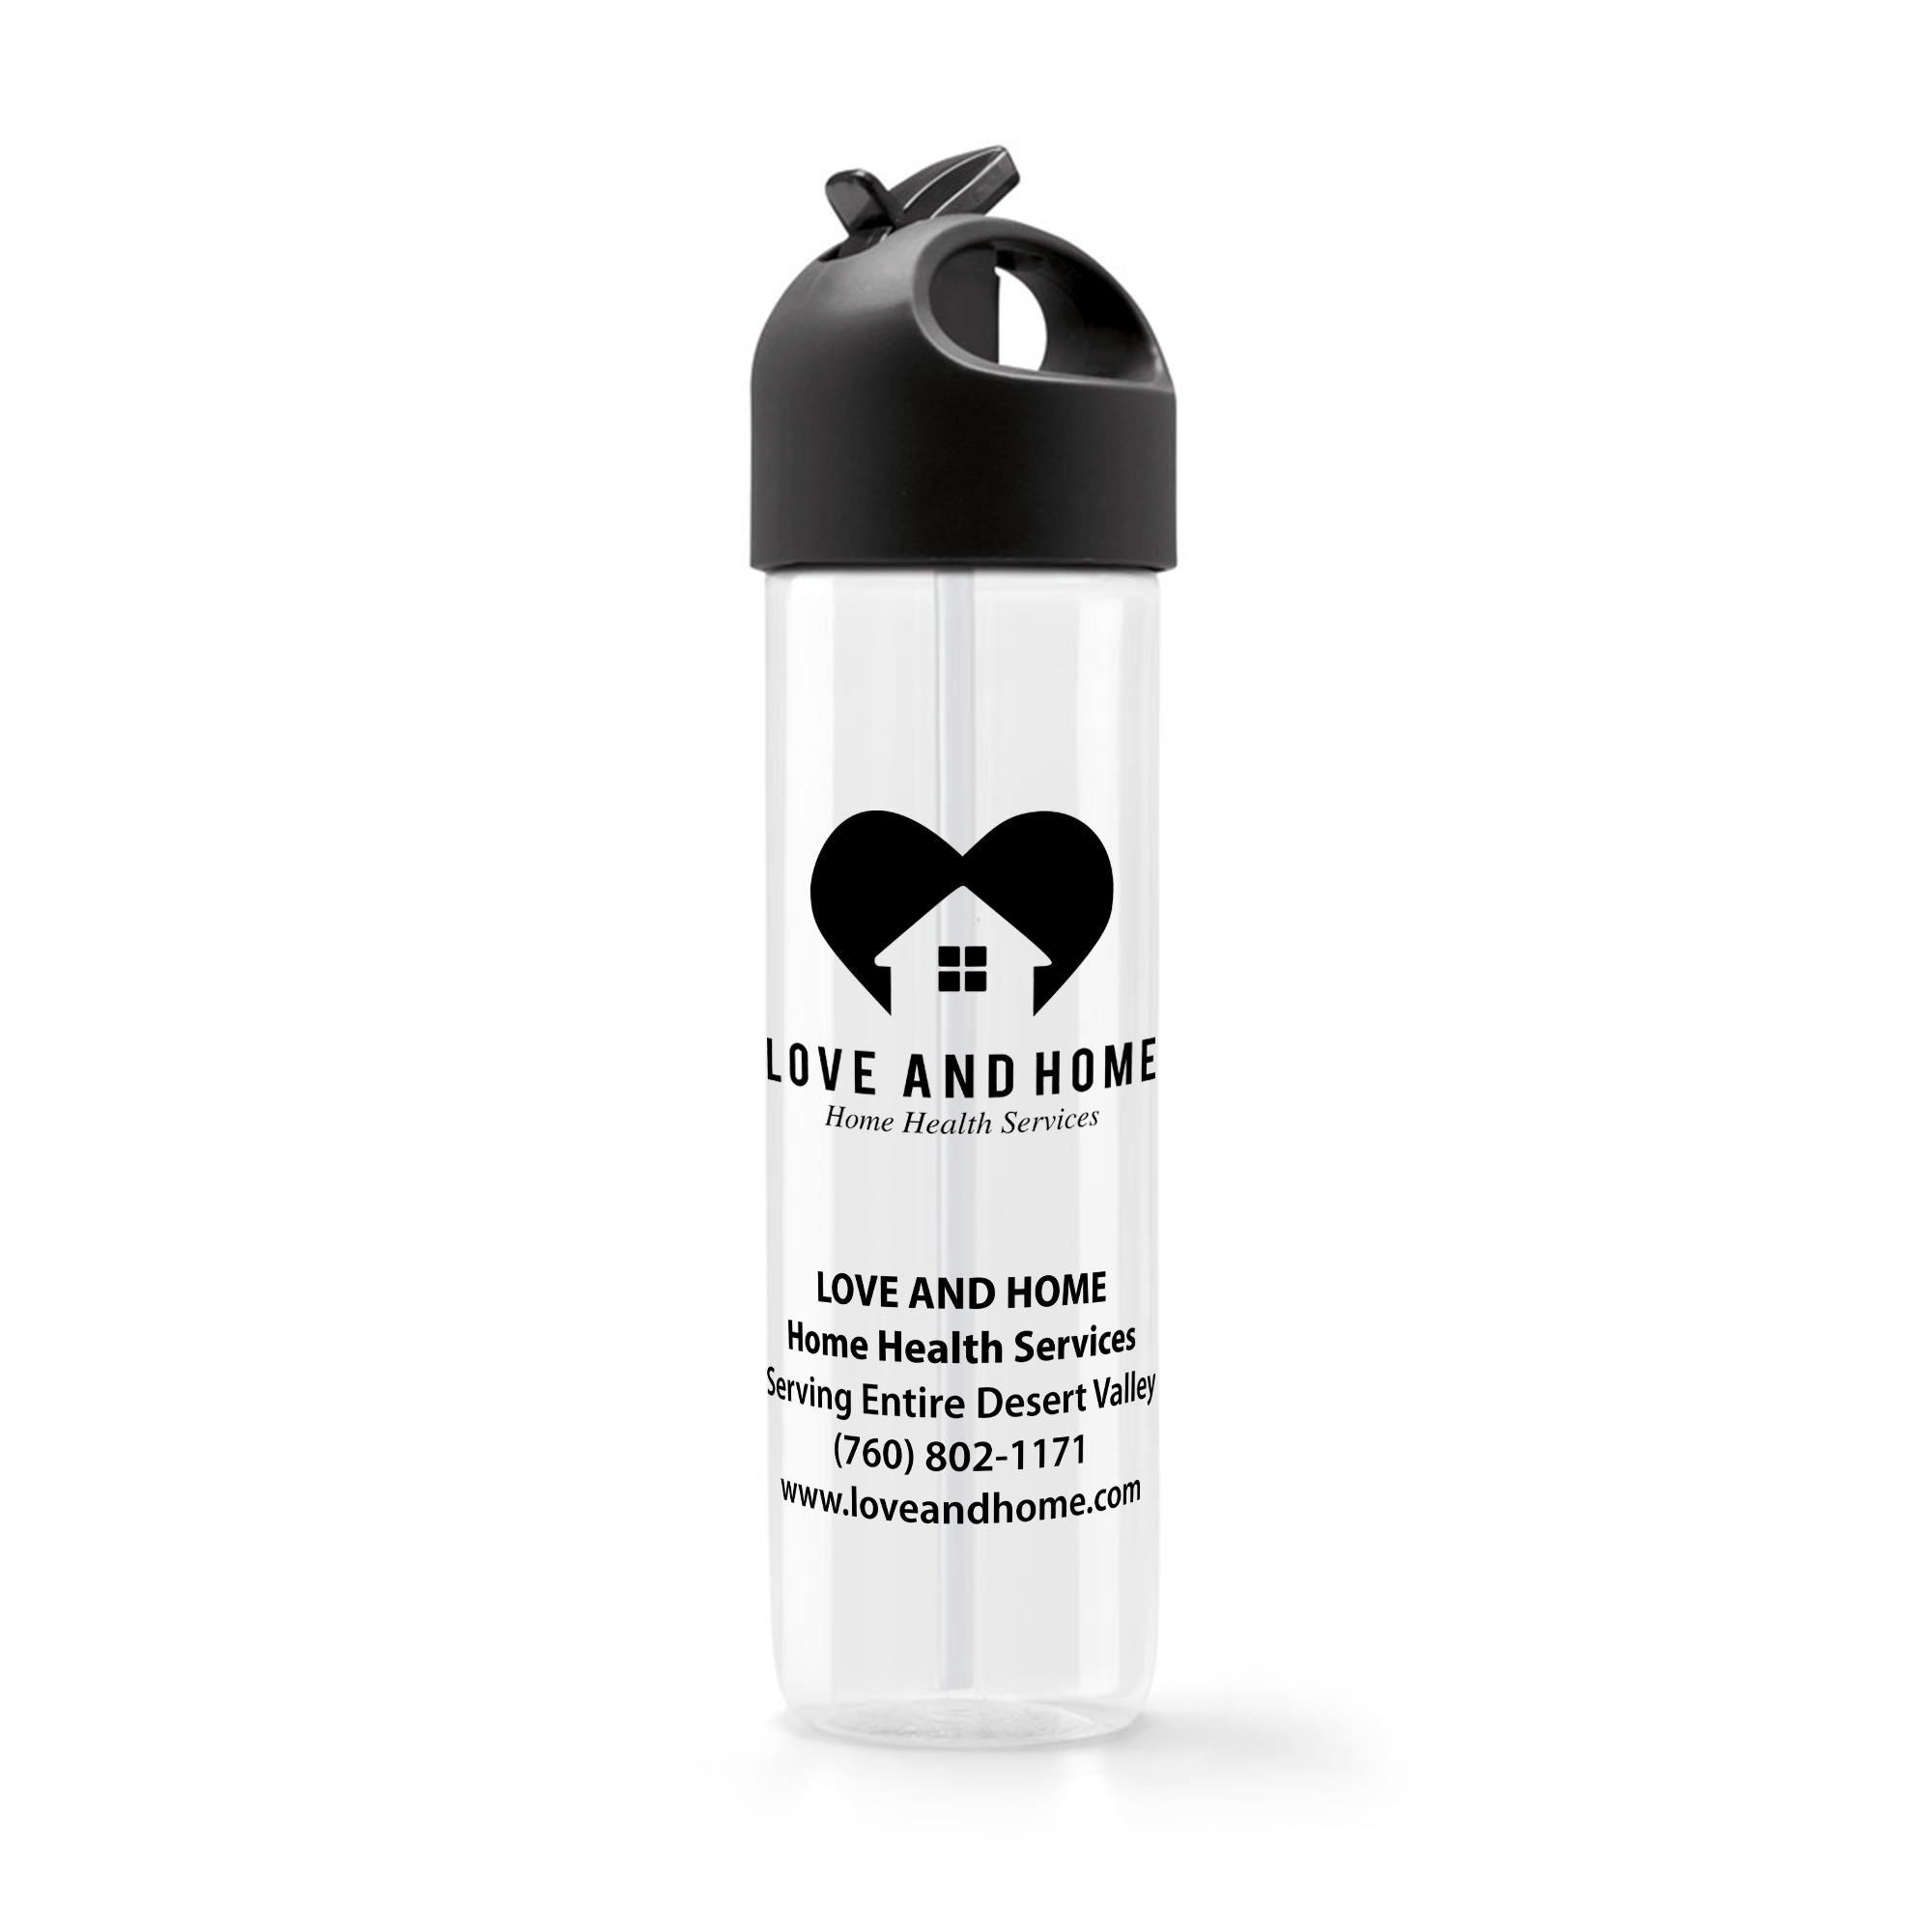 promotional-conley-sports-bottle-500-ml-with-logo-national-pen